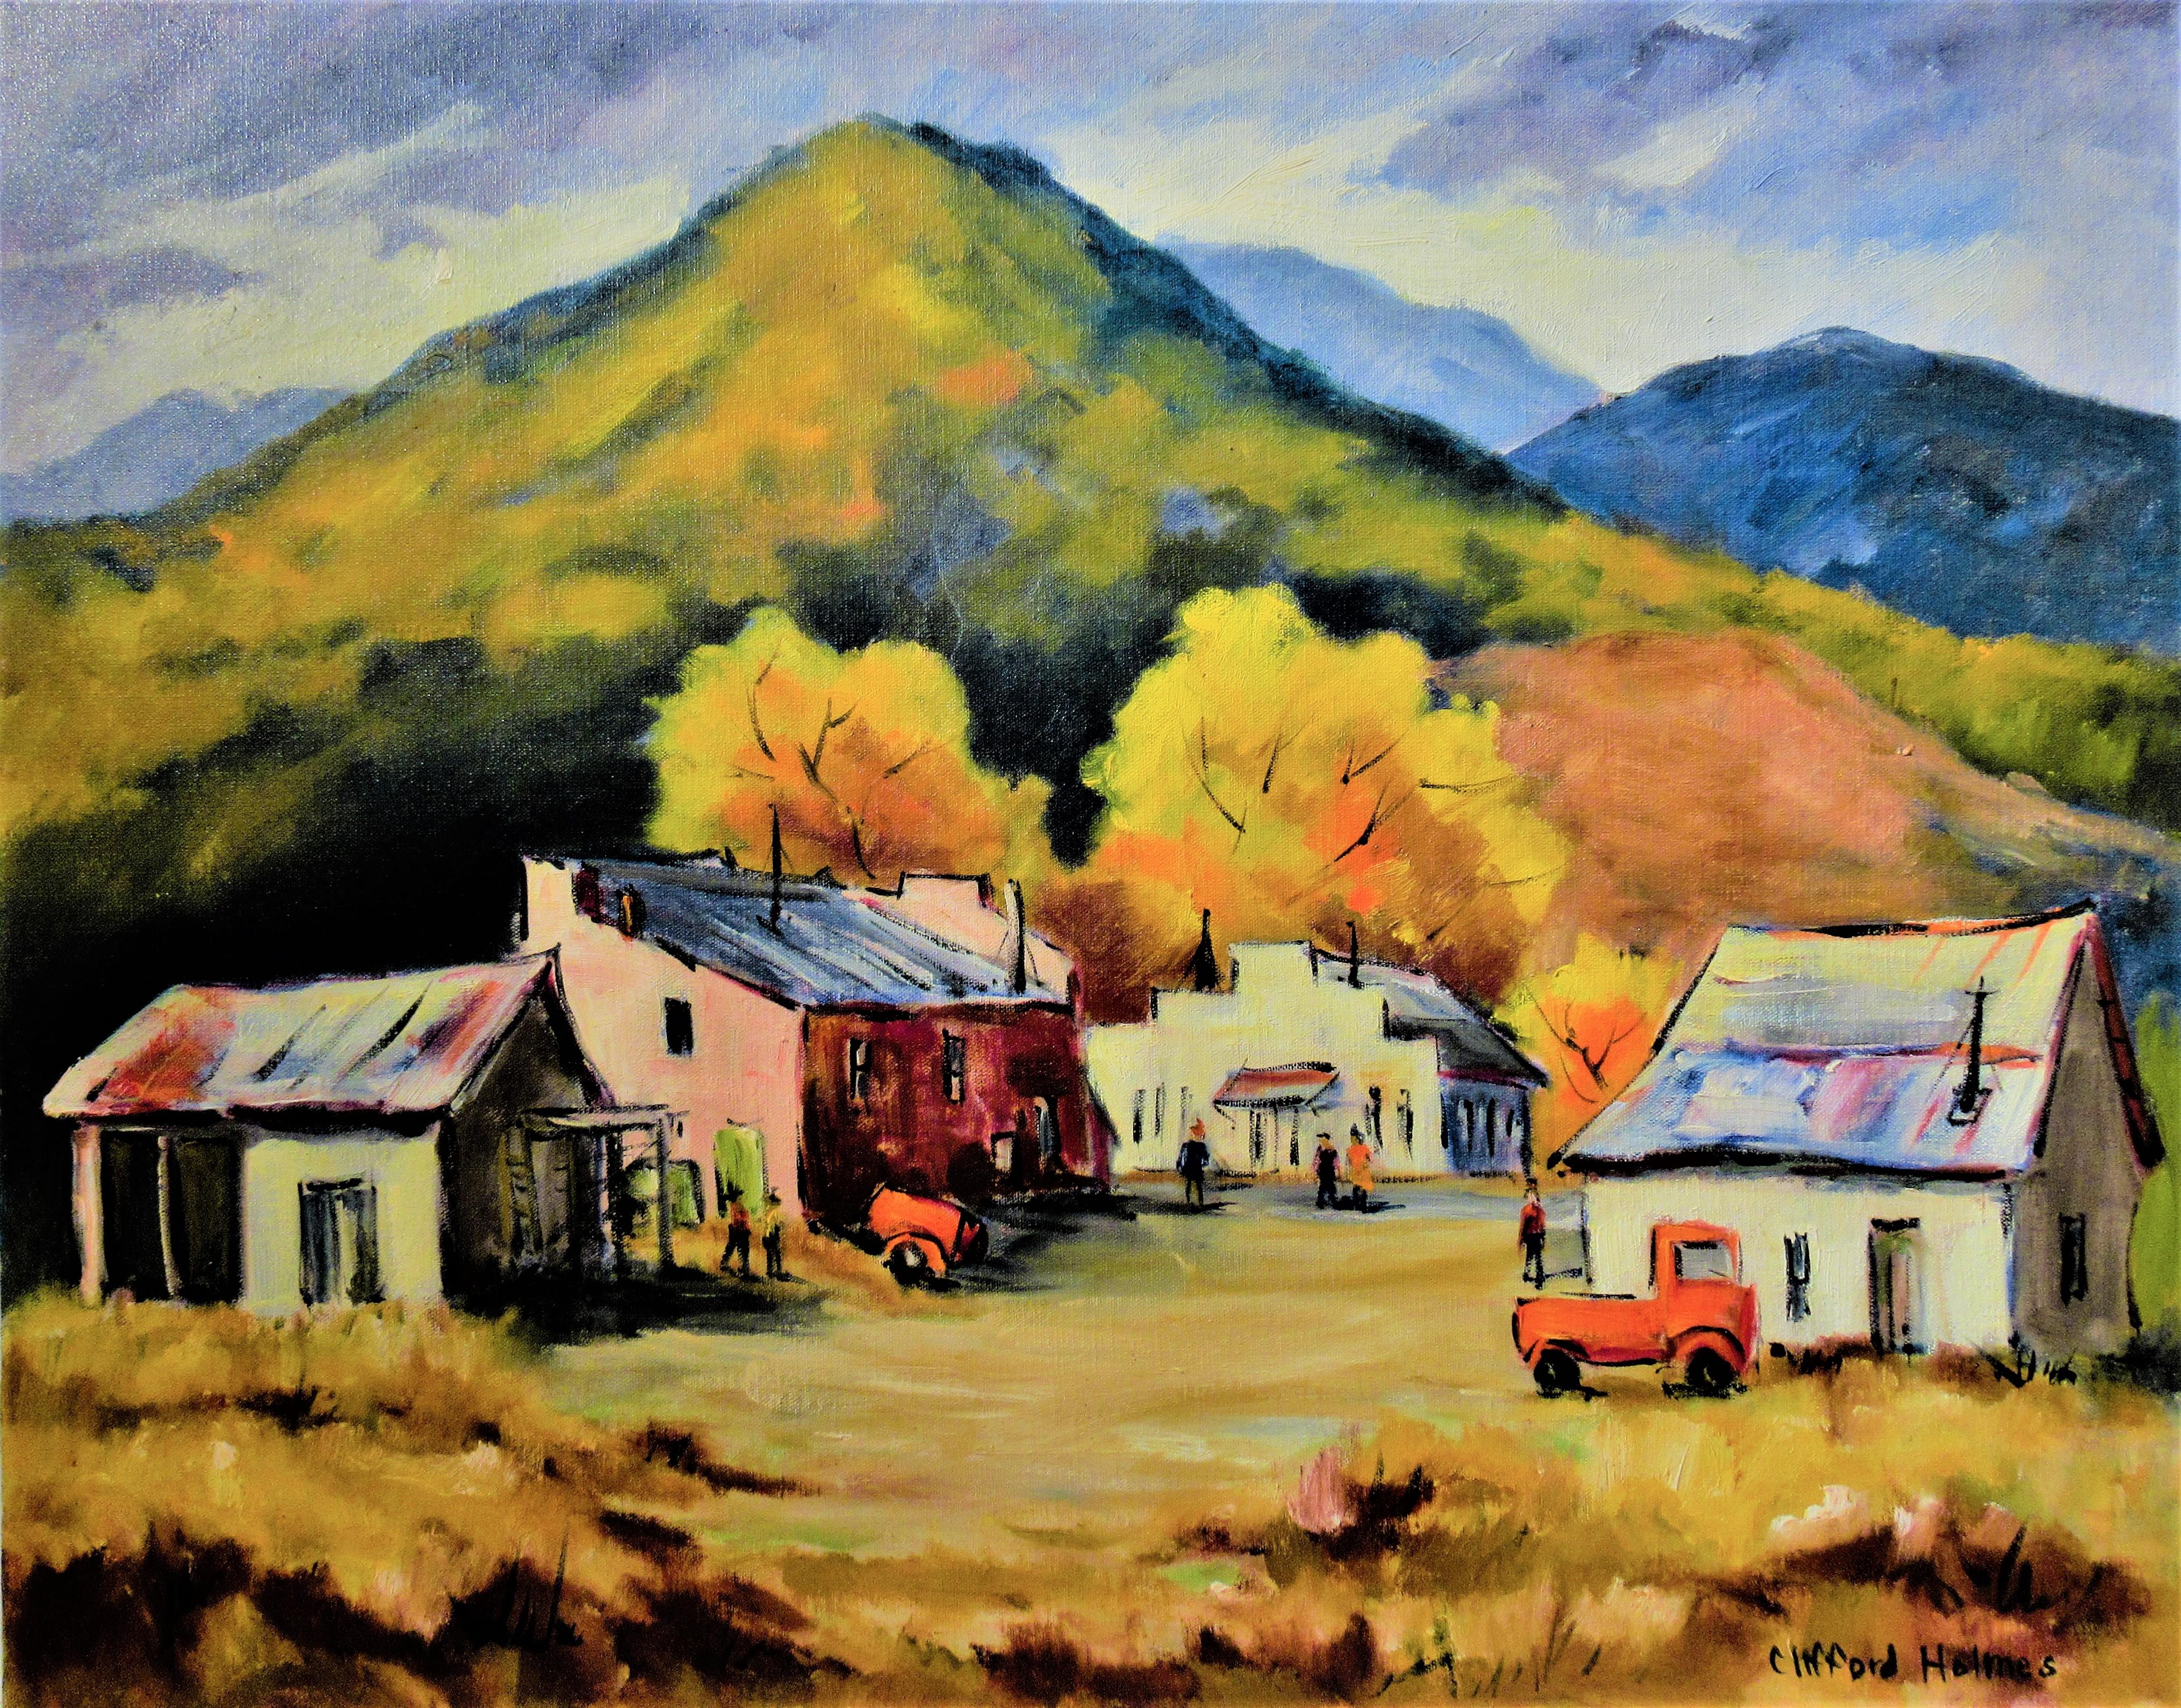 Clifford Holmes Figurative Painting - Fort Jones, Siskiyou County, Neat Mount Shasta